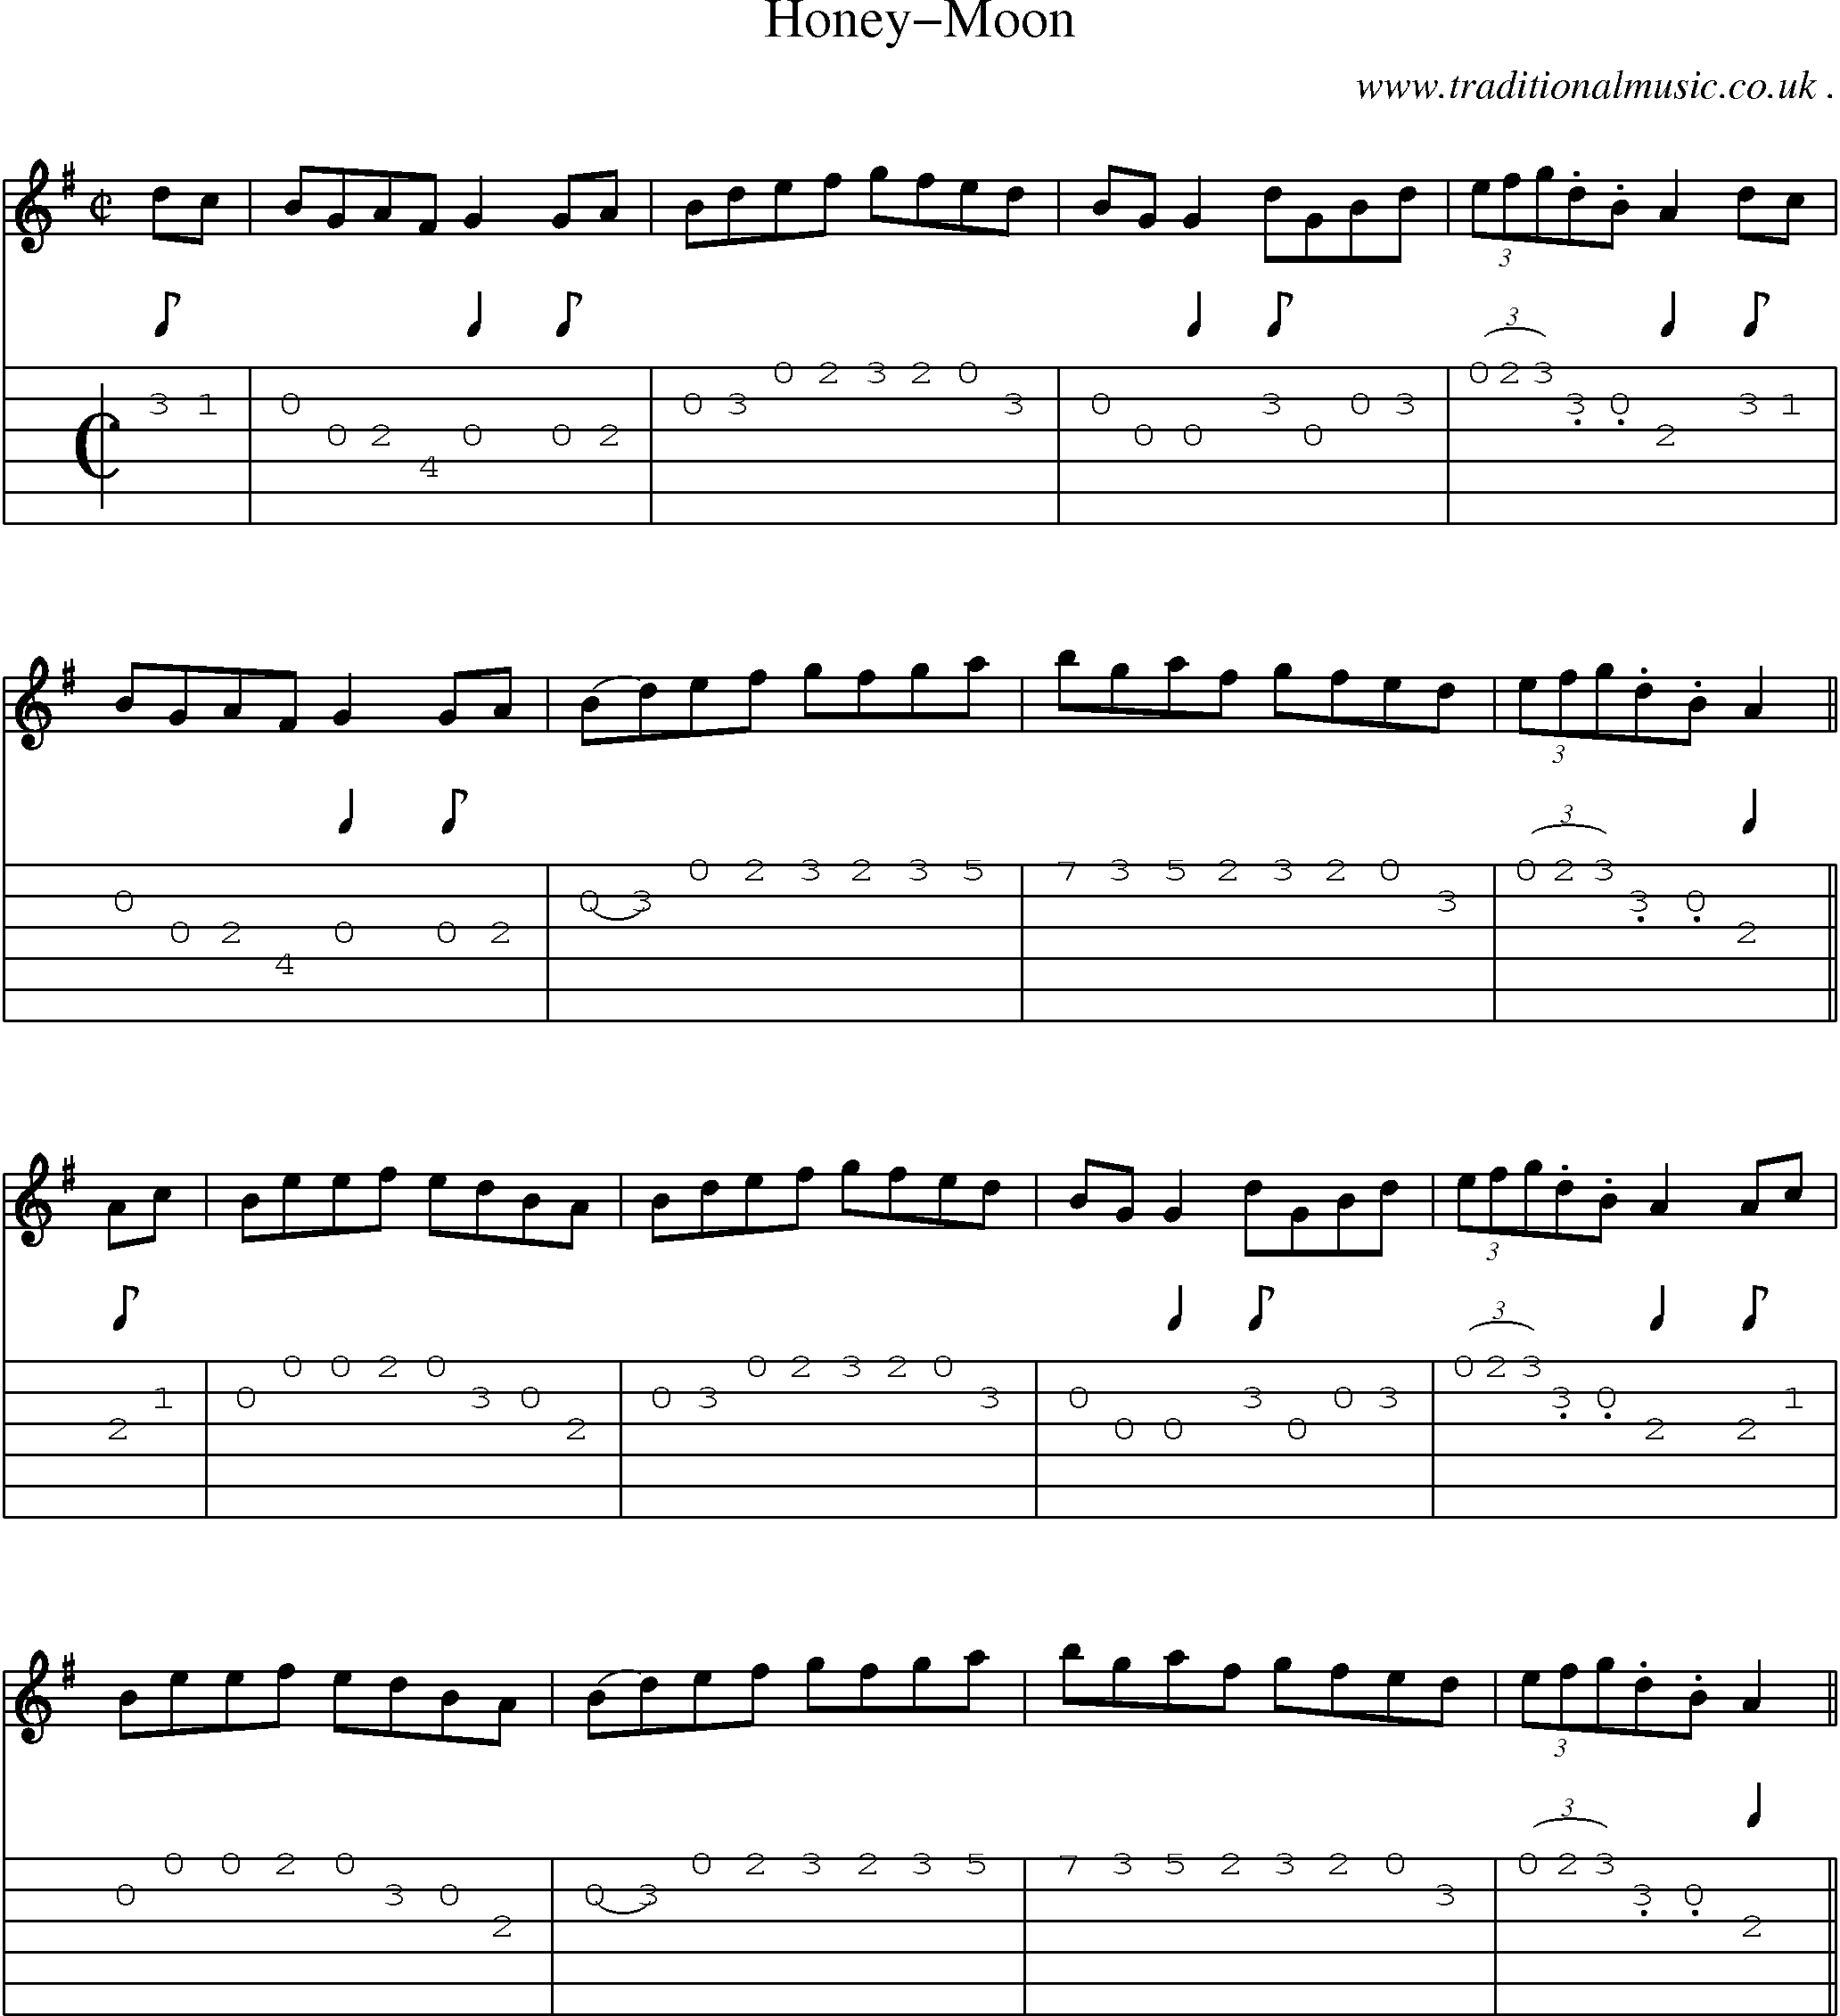 Sheet-Music and Guitar Tabs for Honey-moon